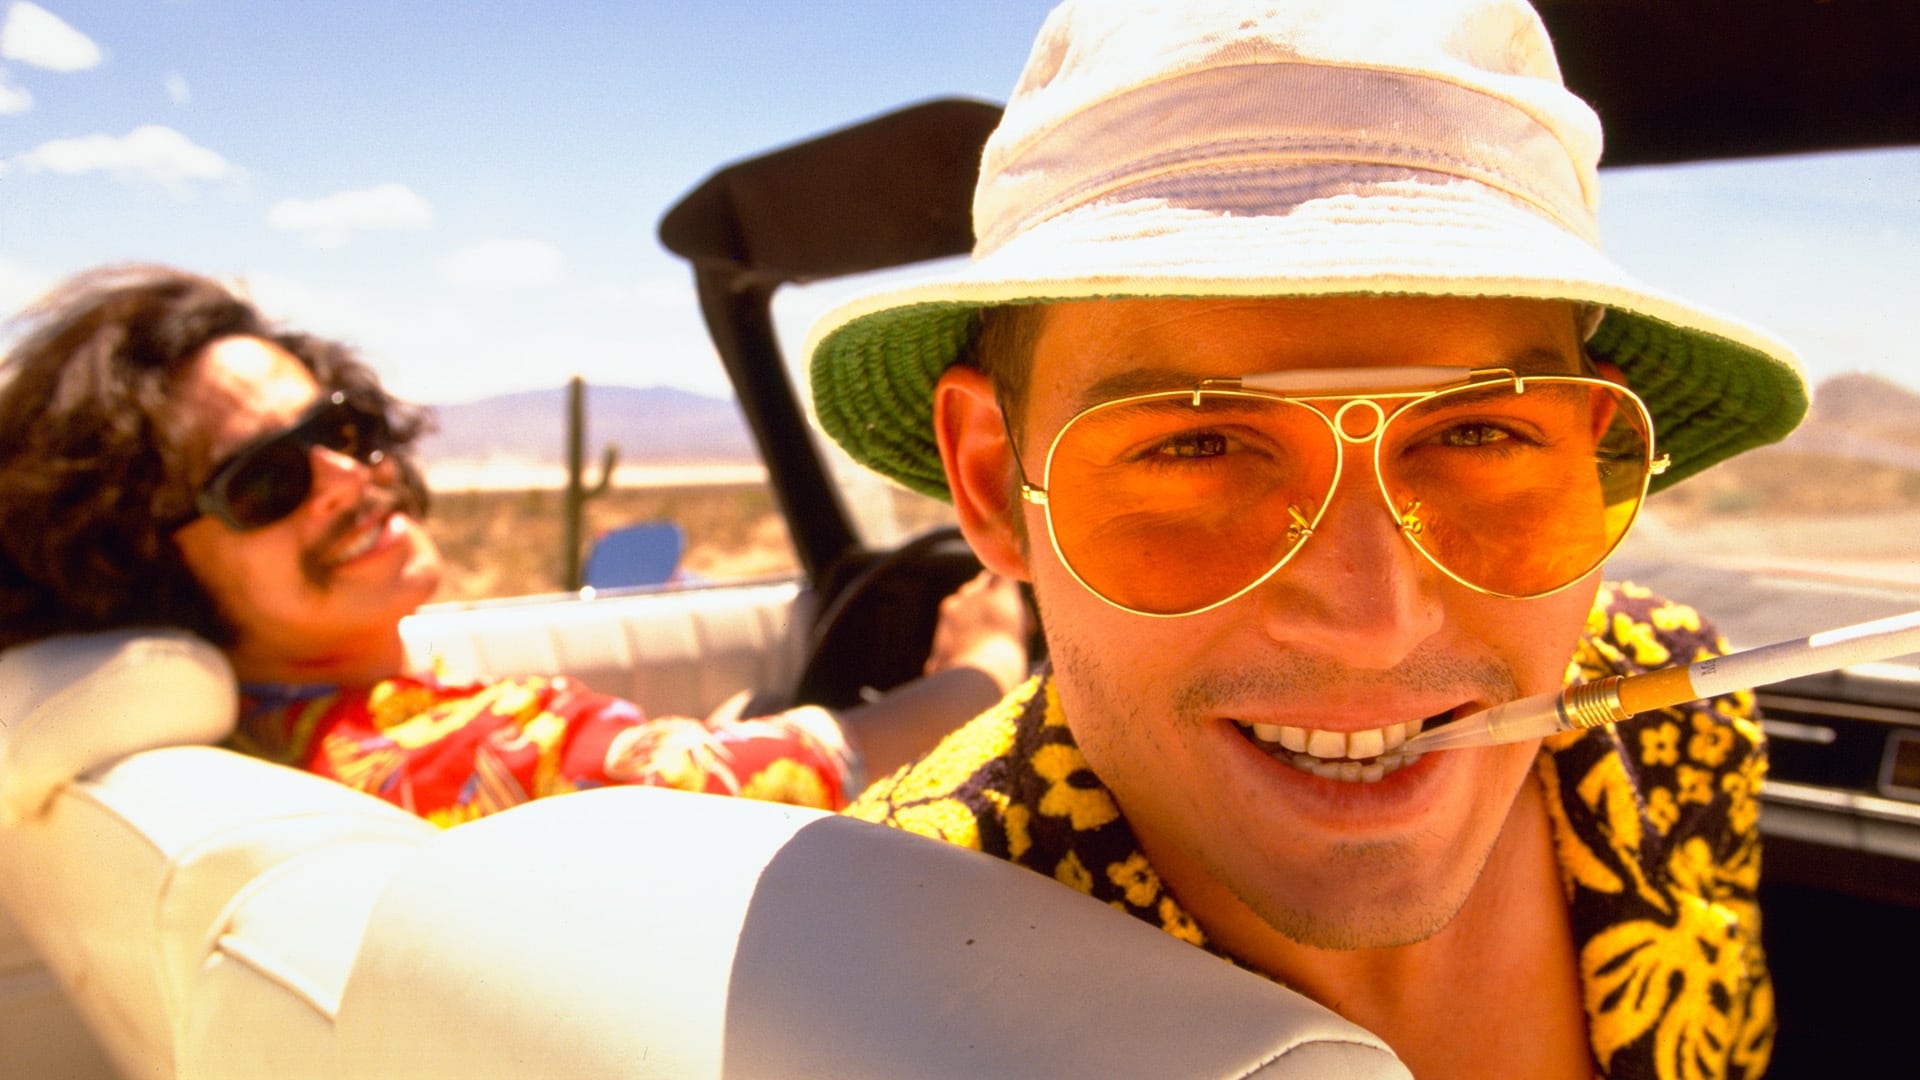 Fear and Loathing in Las Vegas 1998 123movies